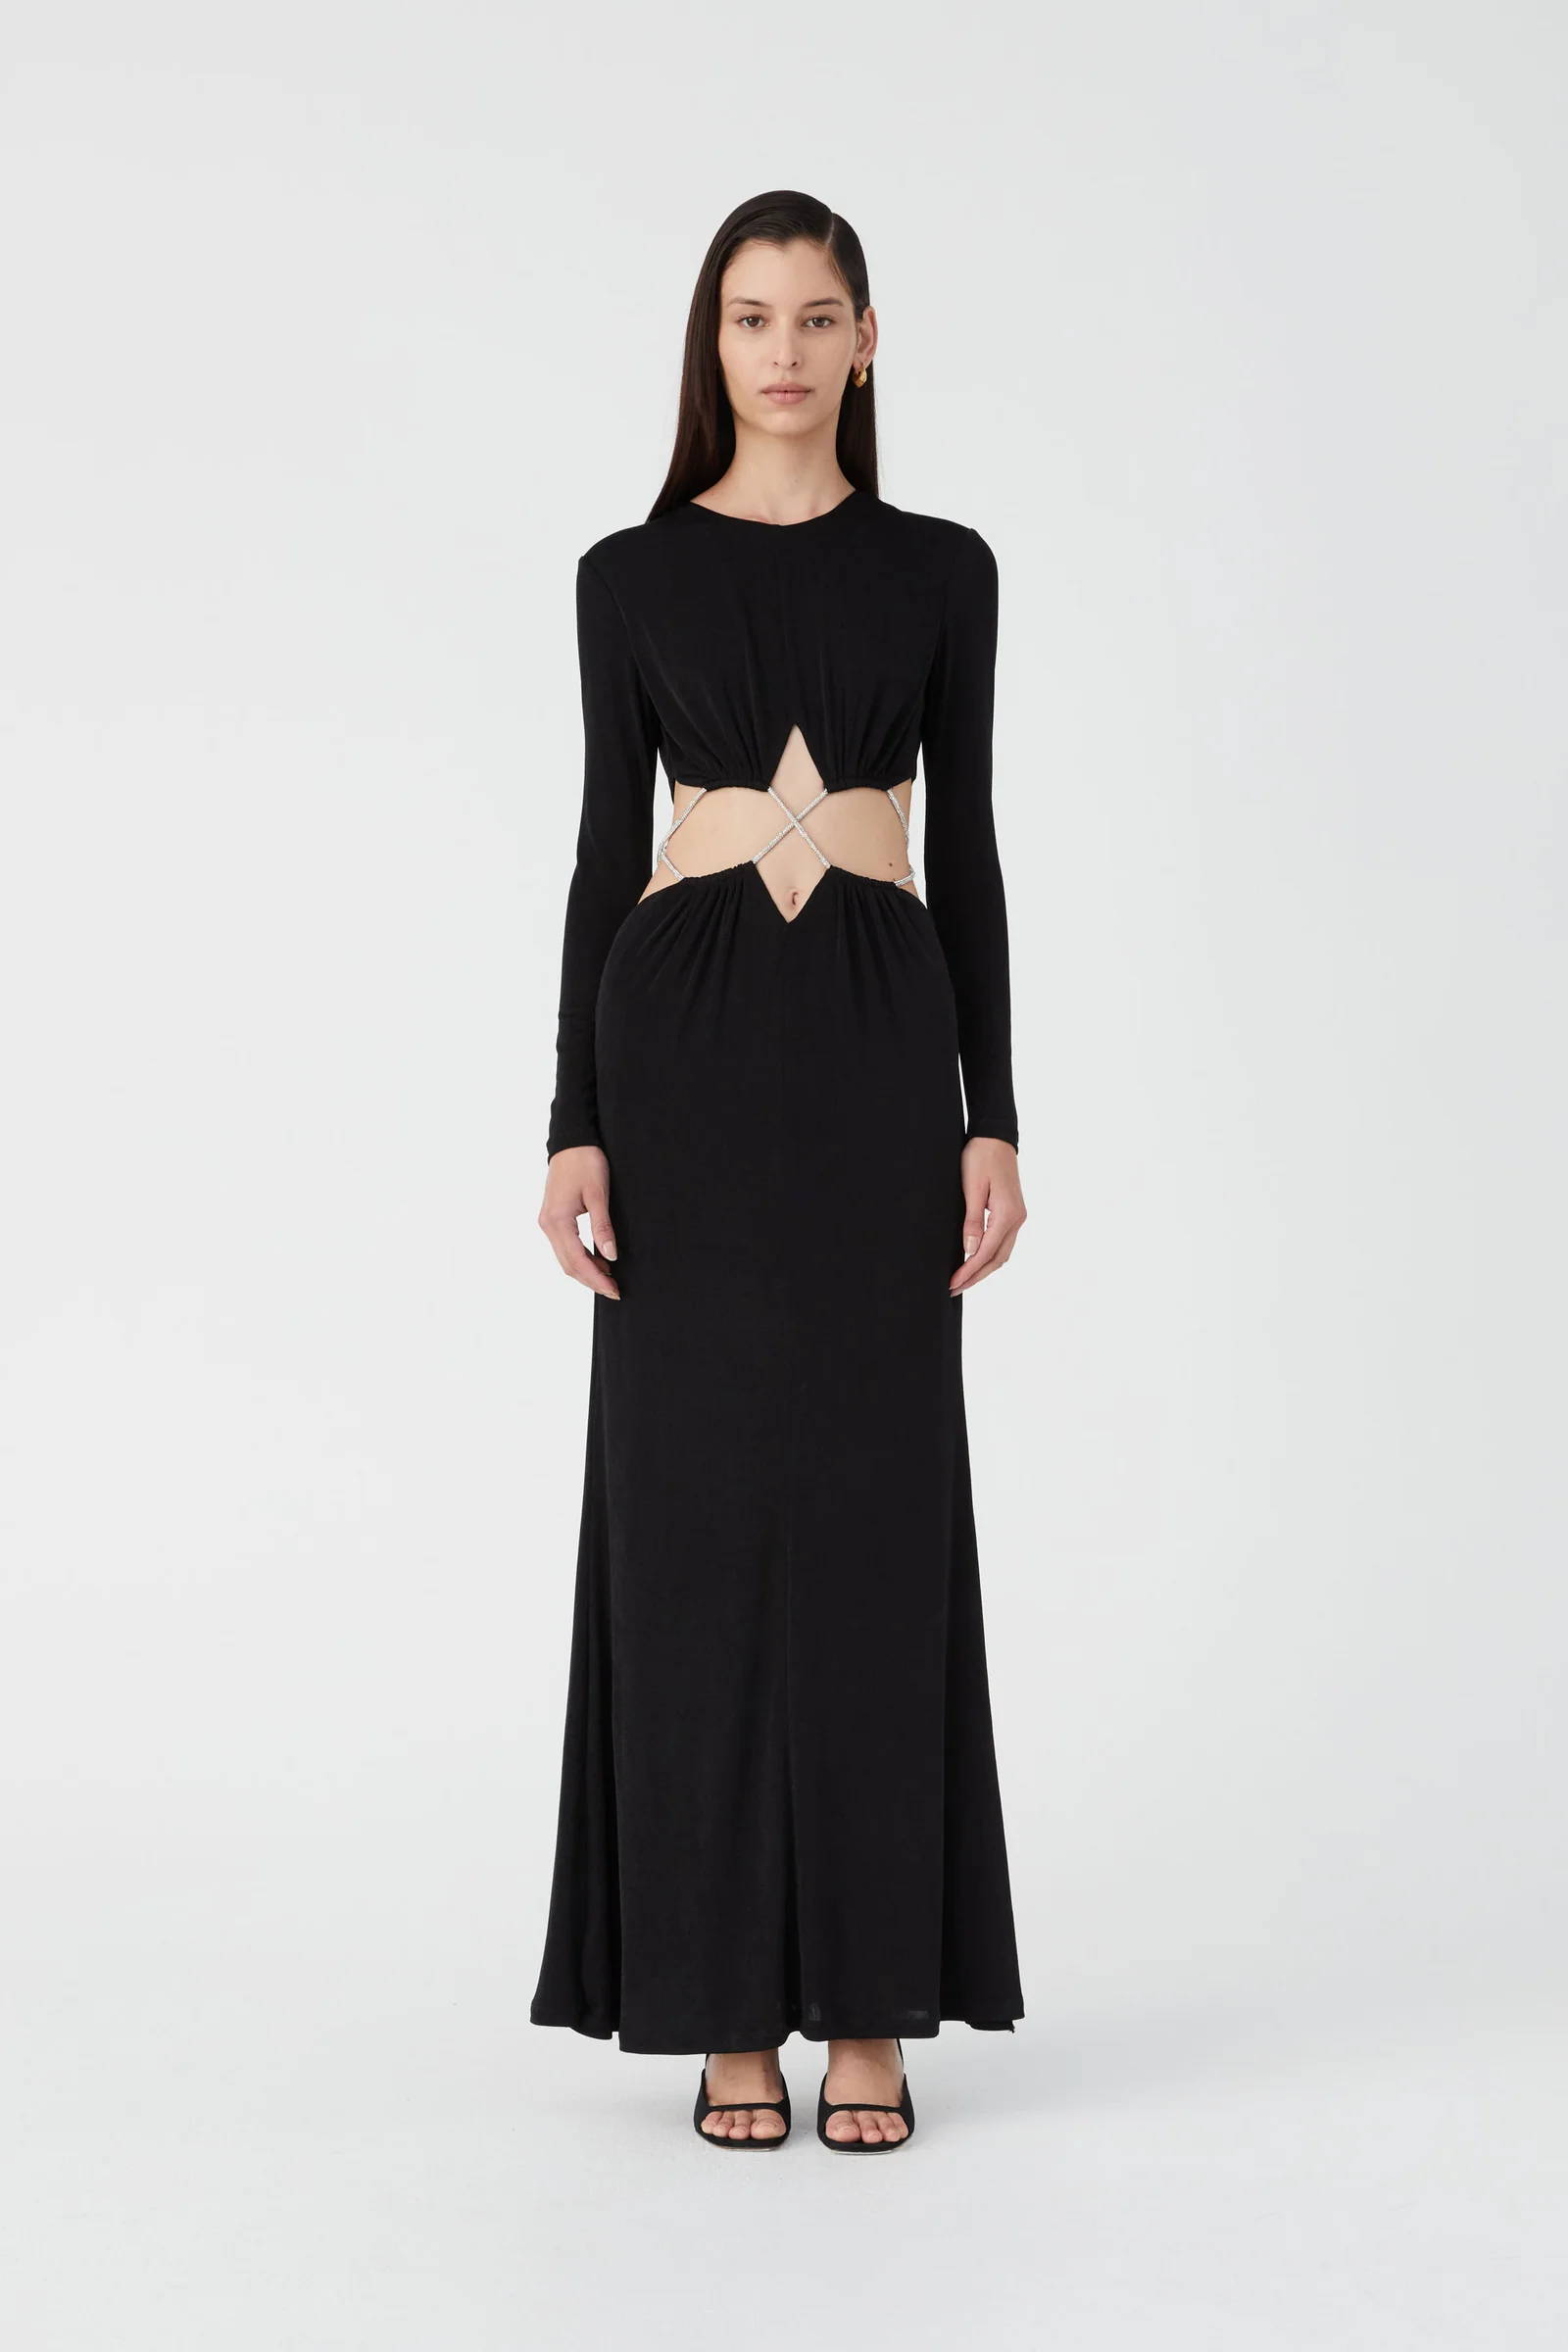 MISHA | Ready-to-Wear Collection of Occassion Dresses, Tops, Separates